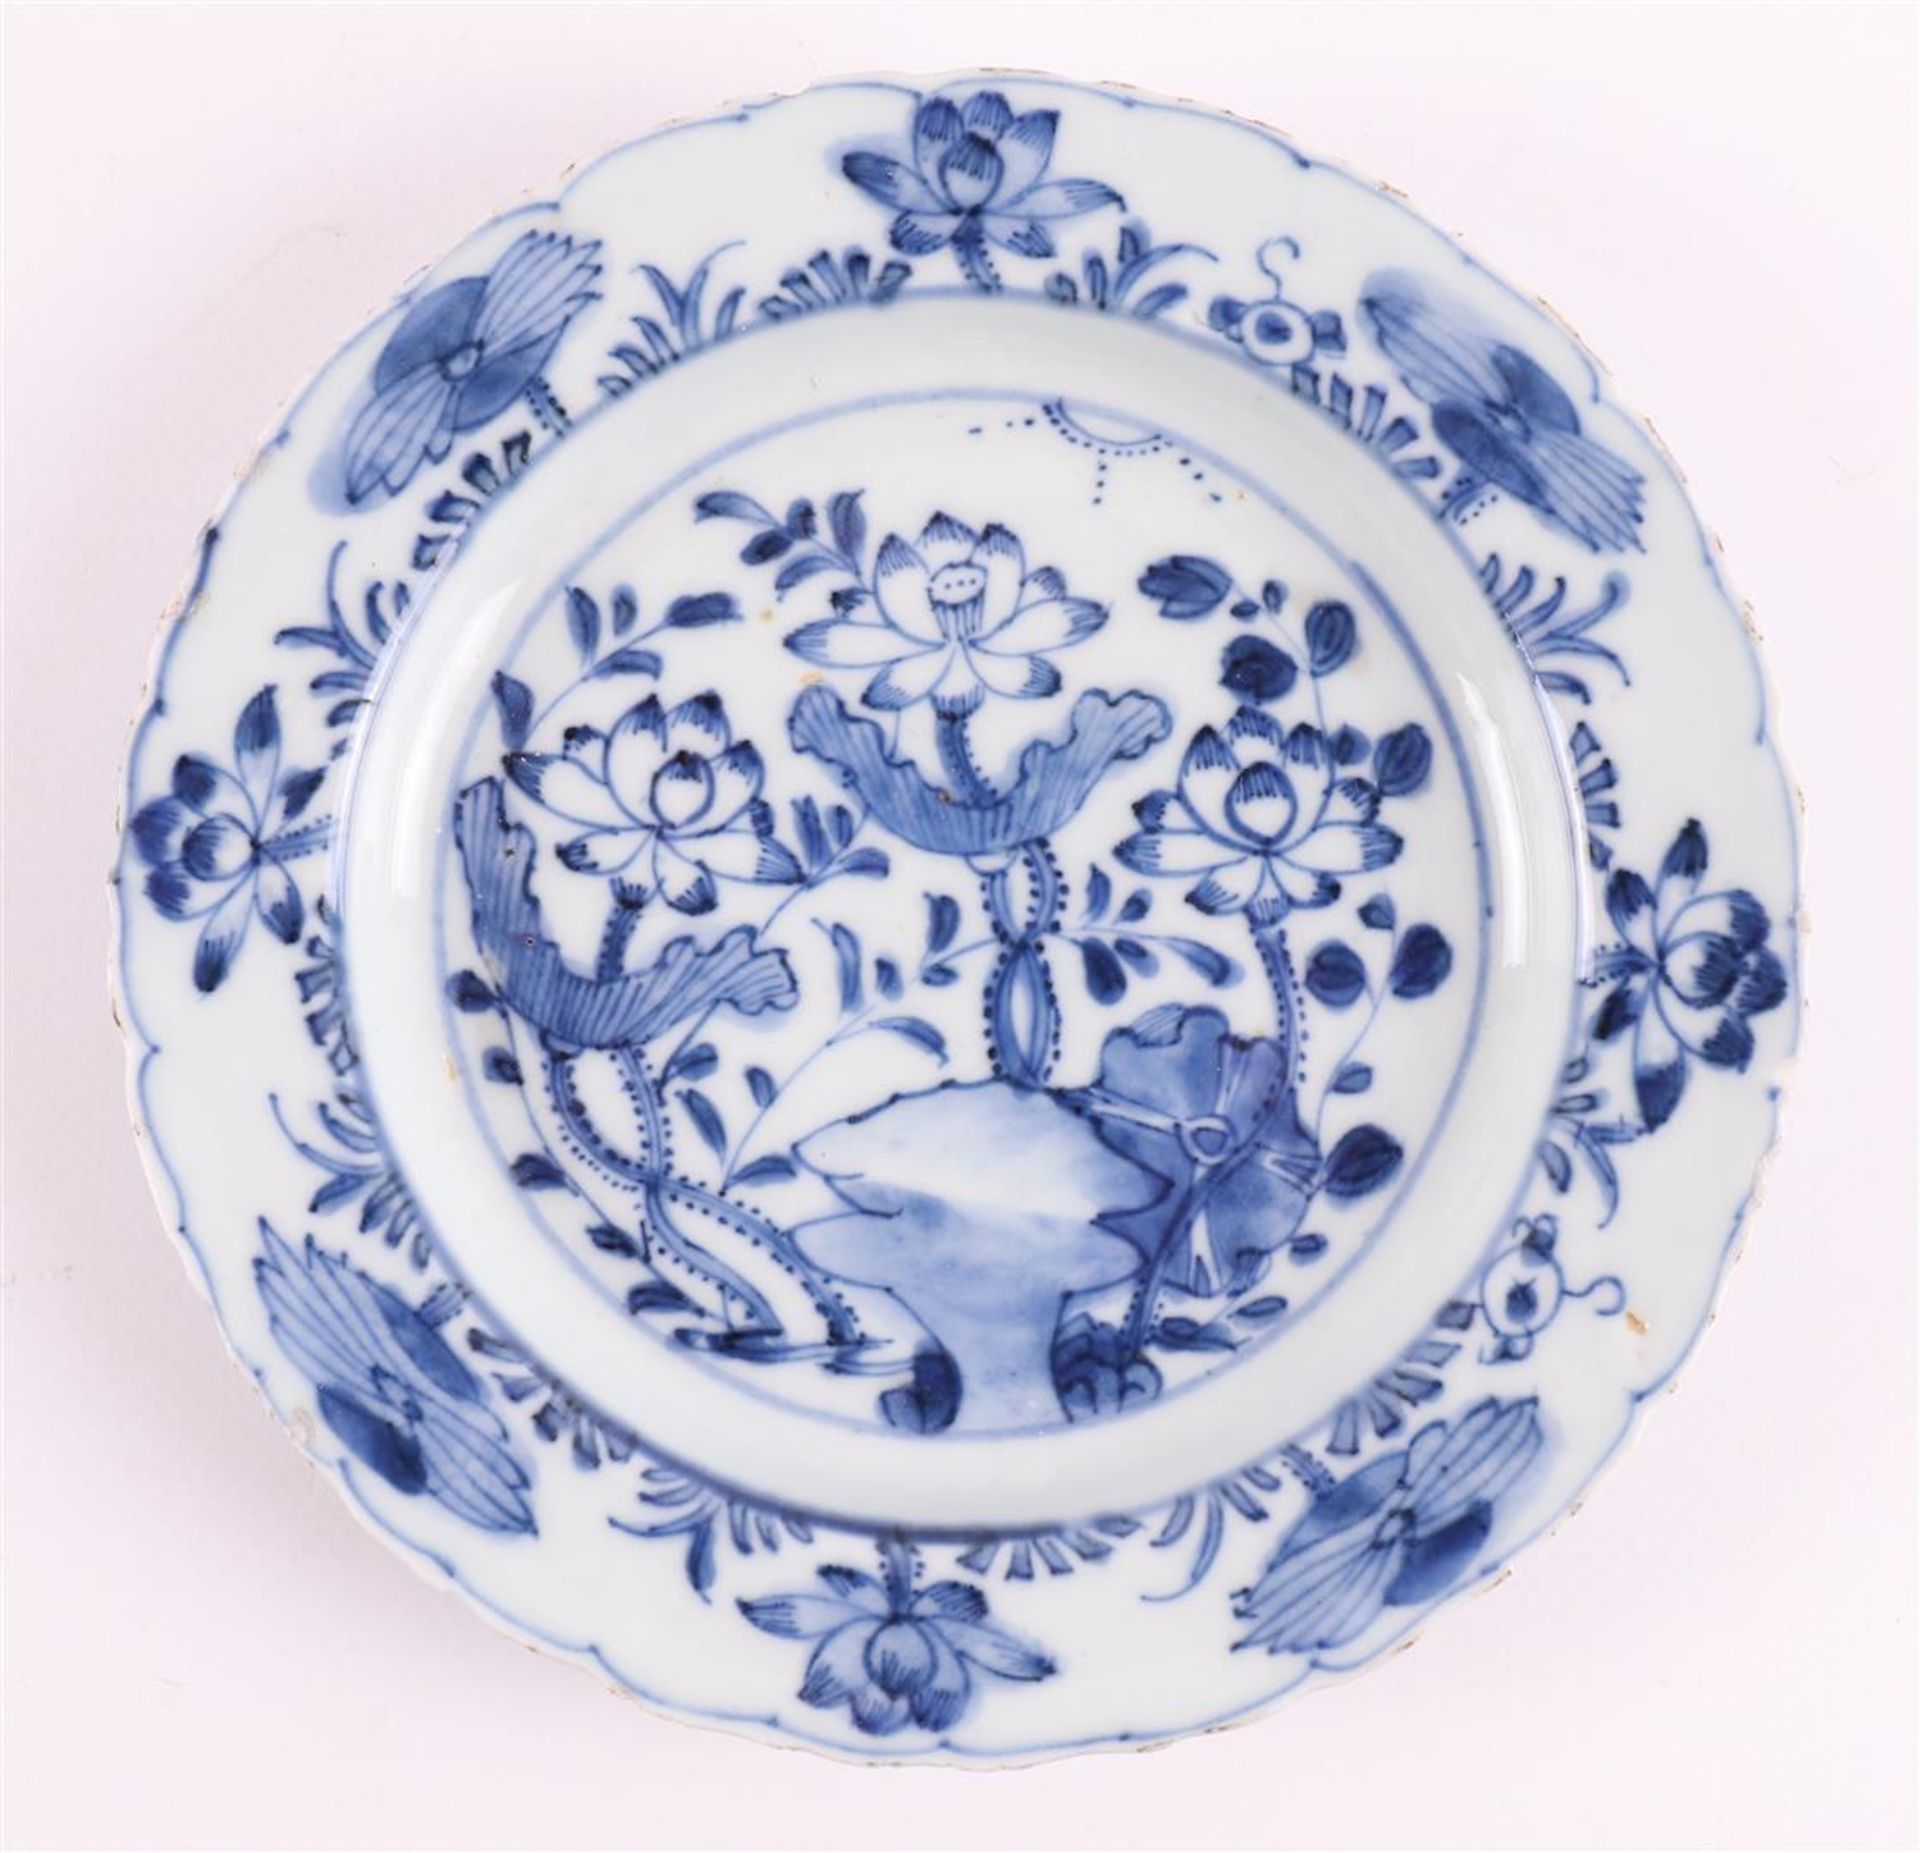 A blue/white porcelain contoured plate, China, 2nd half of the 17th century. - Image 2 of 7